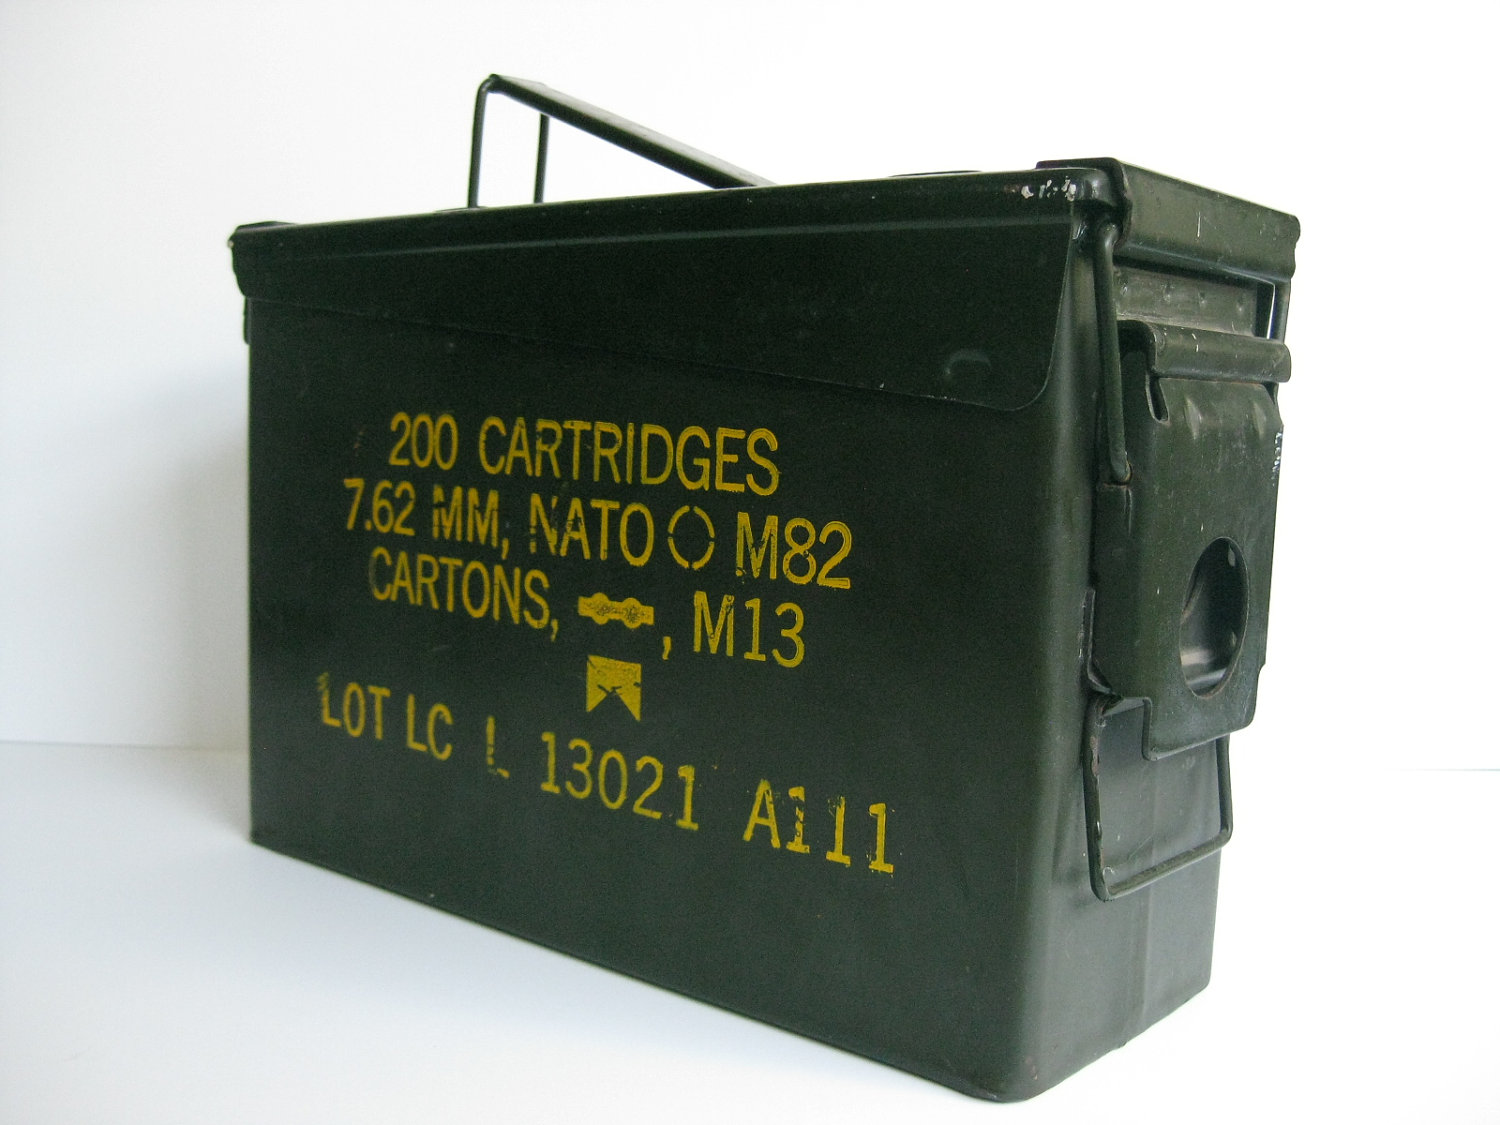 Clip Arts Related To : vintage ammo box. view all Ammo Crate Cliparts). 